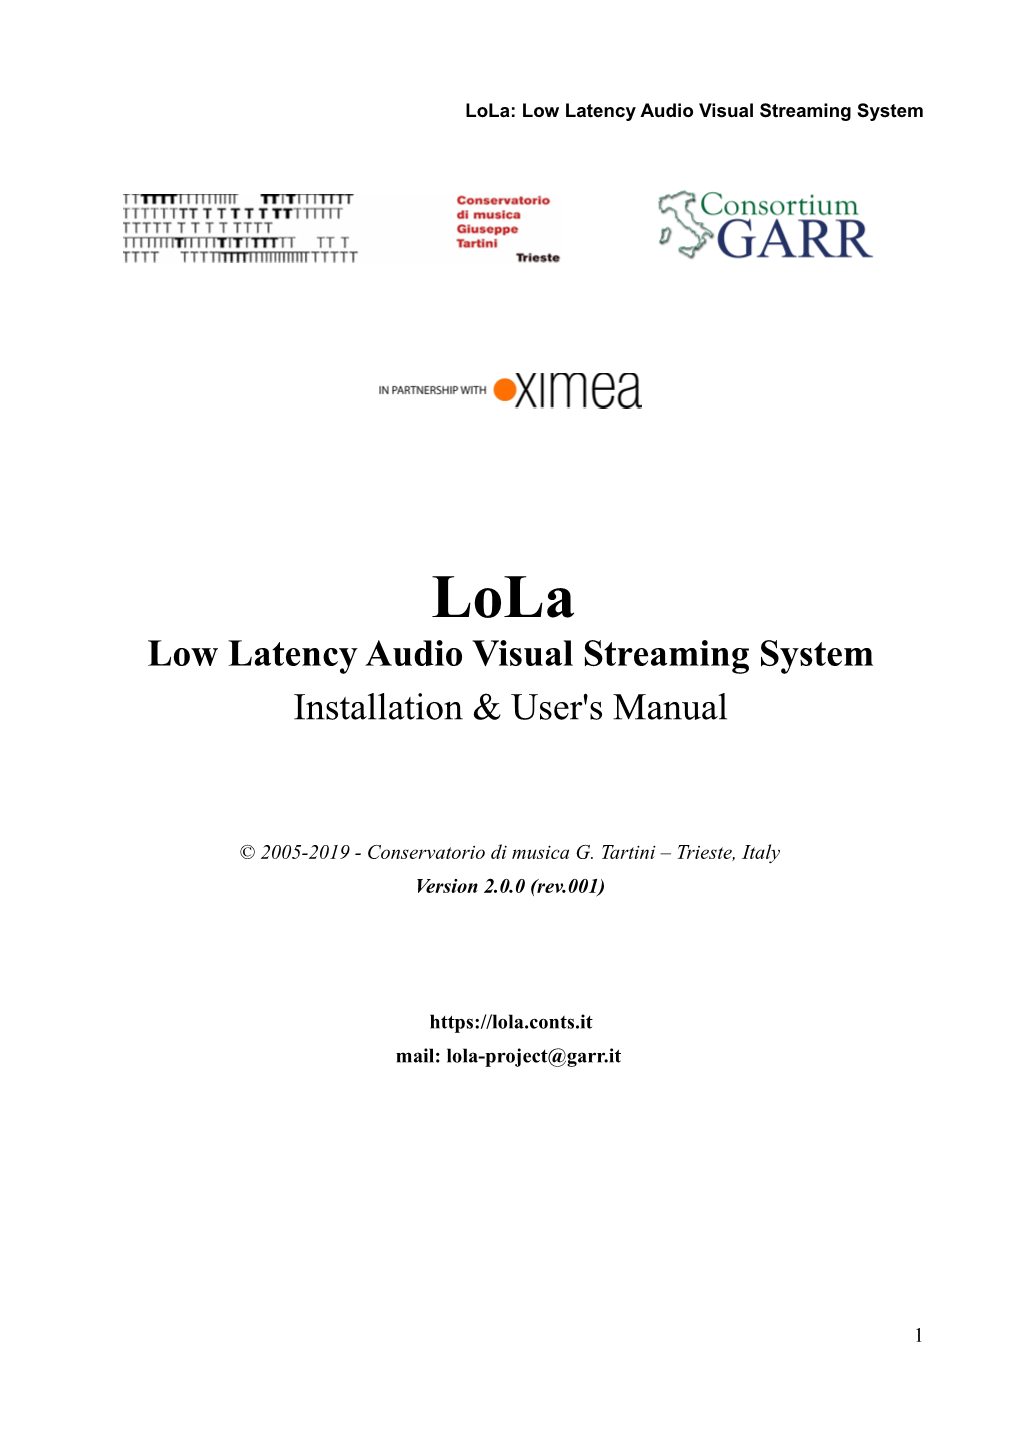 Low Latency Audio Visual Streaming System Installation & User's Manual